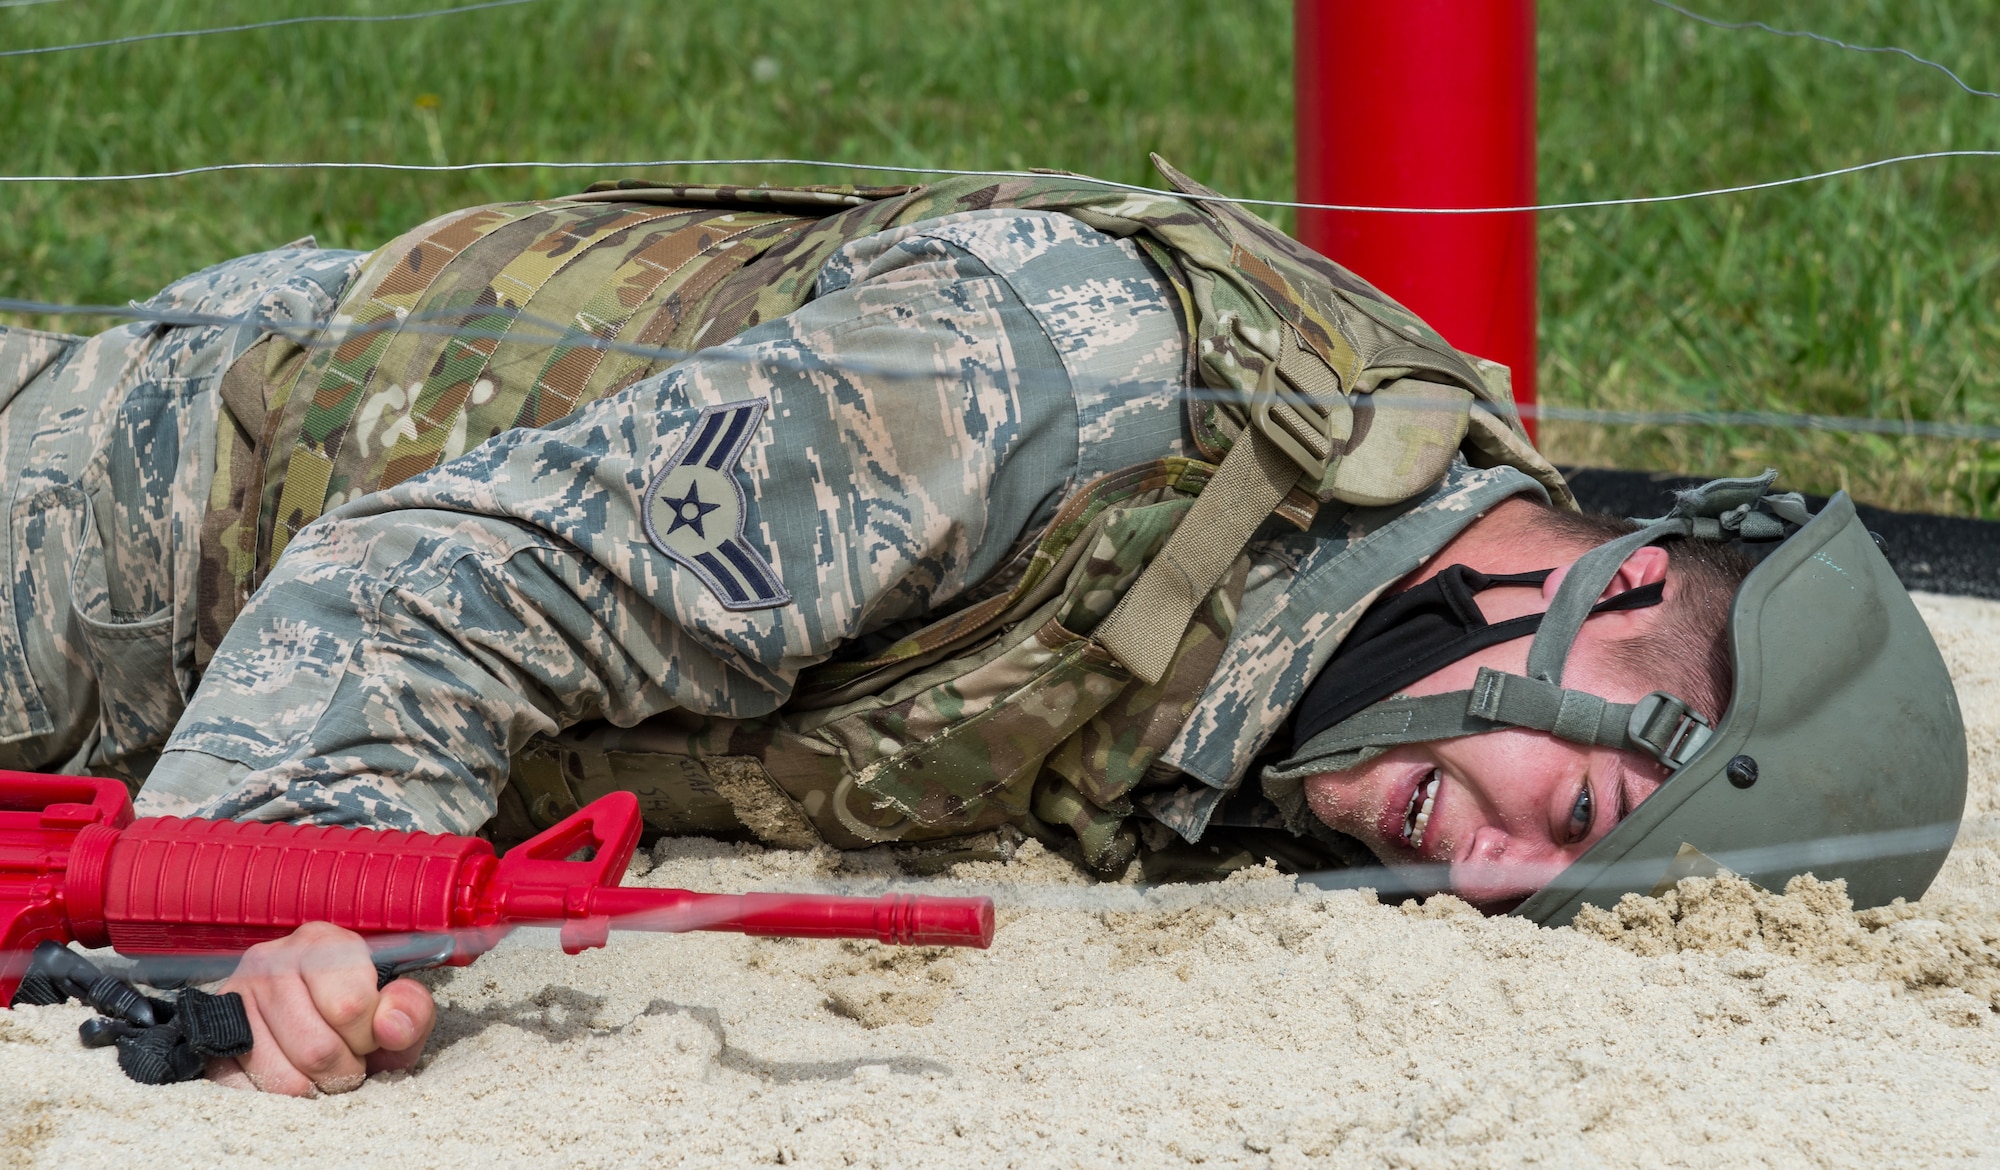 Airman 1st Class Skylar Cunningham, 436th Civil Engineer Squadron Prime Base Engineer Emergency Force member, performs a low crawl during an obstacle course exercise Oct. 21, 2020, at Tactics and Leadership Nexus on Dover Air Force Base, Delaware. Sixty-four Prime BEEF members made up 10 teams that participated in a 96-hour readiness exercise that included self-aid and buddy care, vehicle convoy techniques and land navigation prior to arriving at the TALN. While at TALN, they participated in night vision goggle familiarization; chemical, biological and radiological and nuclear defense training; individual movement techniques; and defense fighting position exercises. (U.S. Air Force photo by Roland Balik)